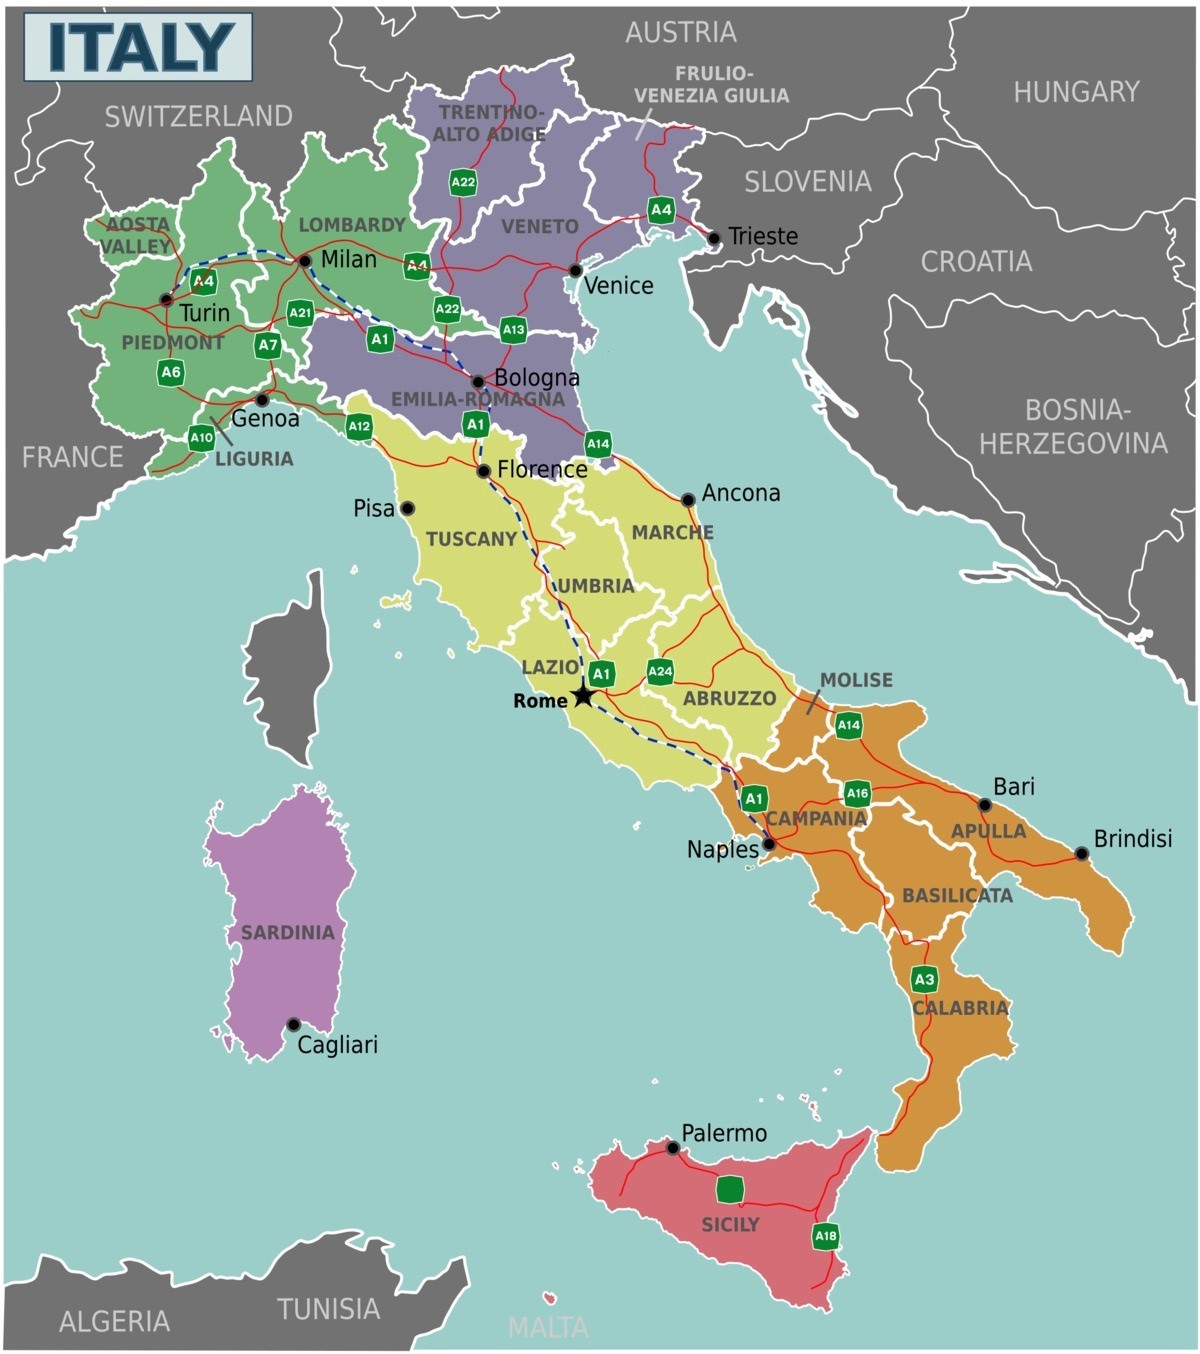 Northern Italy vs. southern Italy